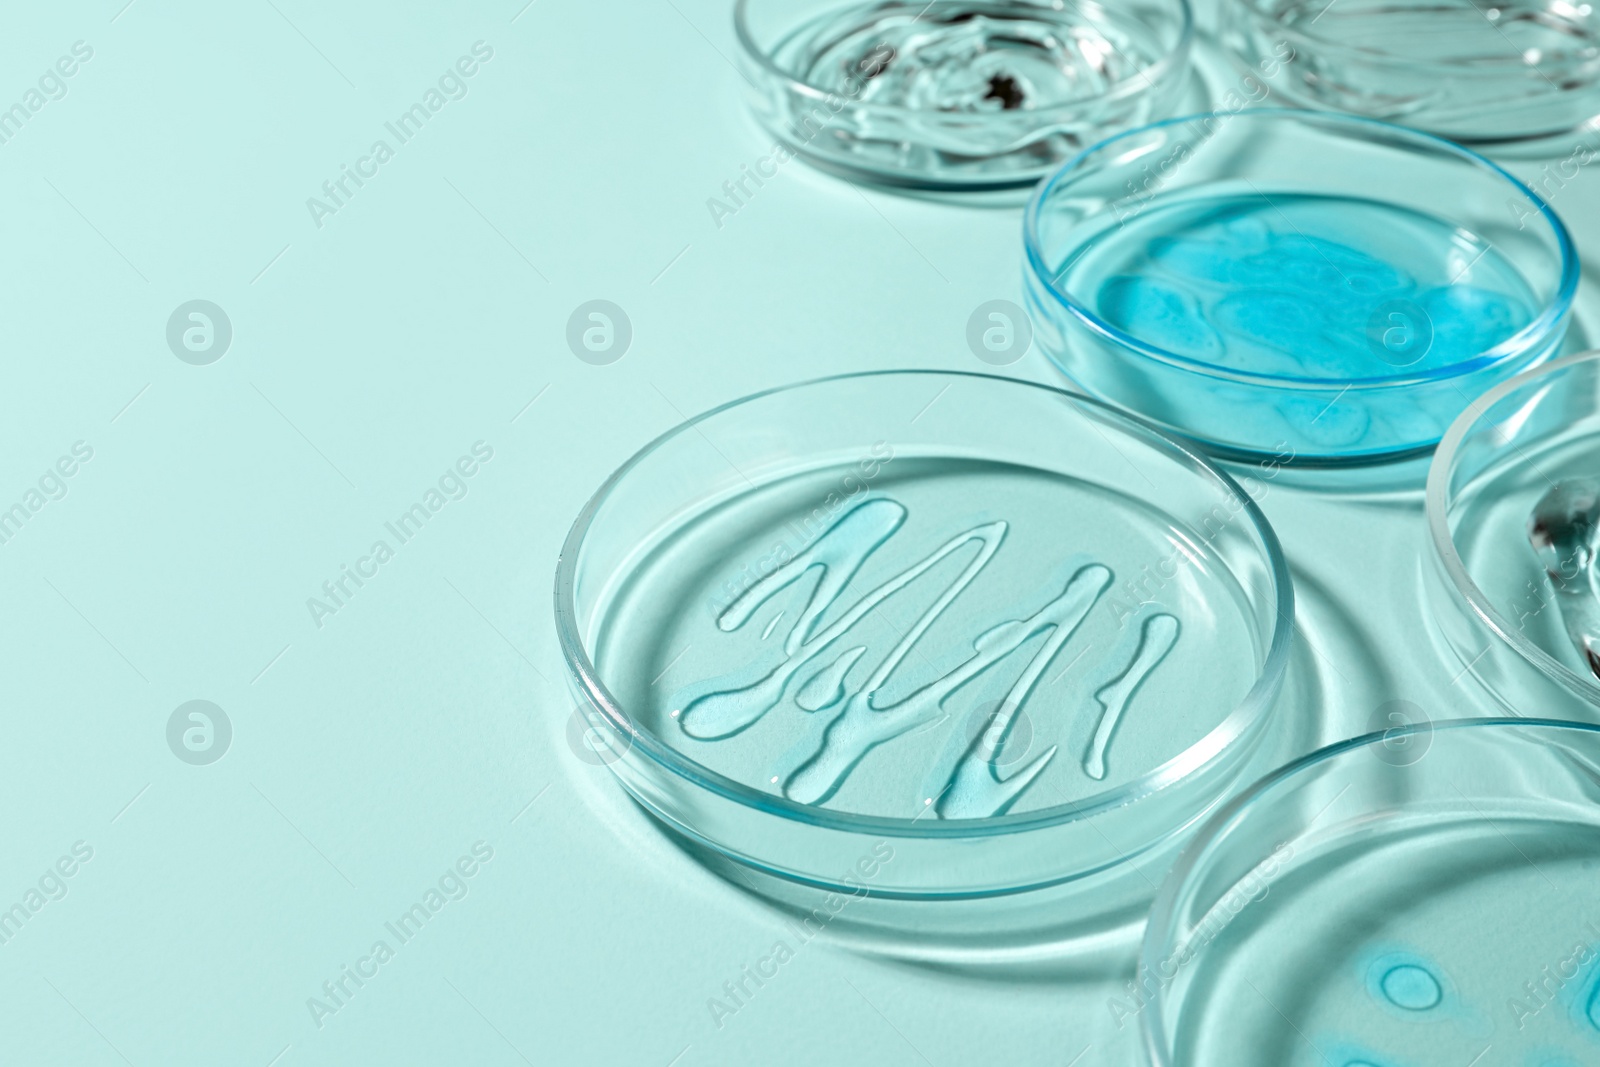 Photo of Petri dishes with liquids on turquoise background. Space for text